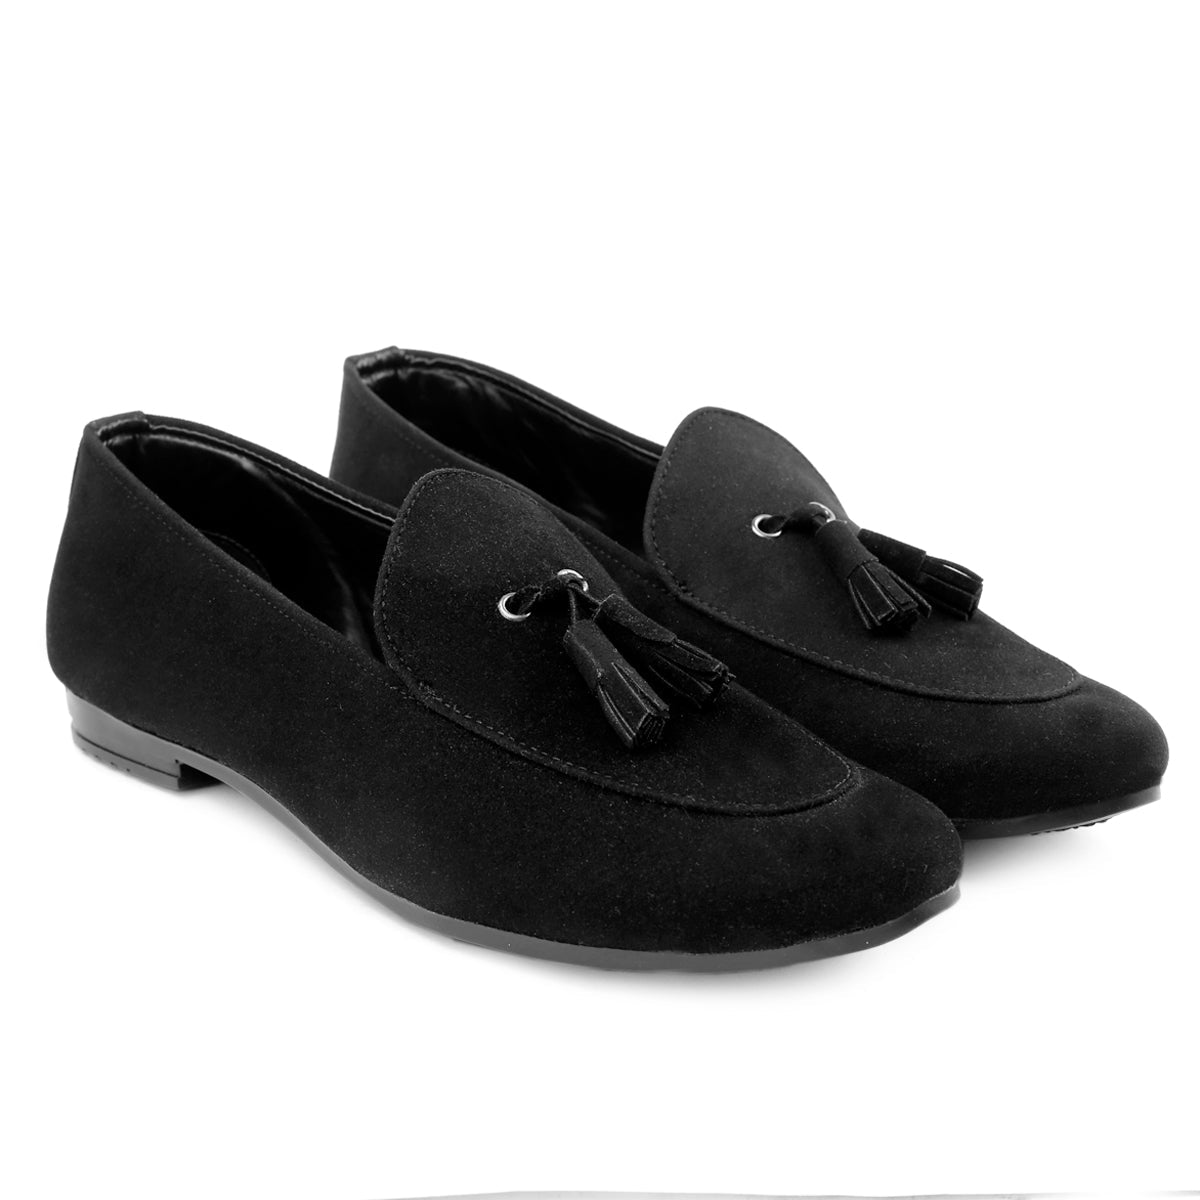 Designer Suede Moccasin Slip on Shoe For Men Party And Casual Wear -JackMarc